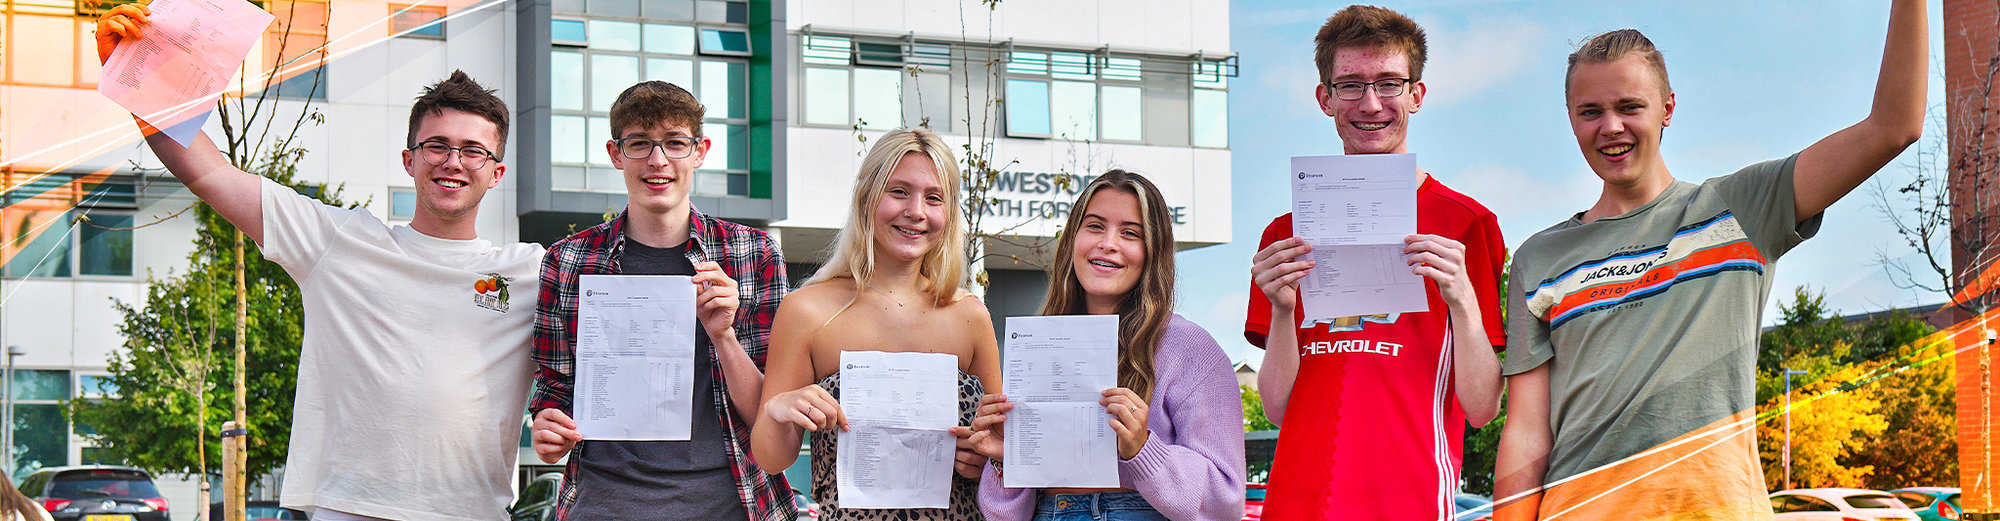 A group of students outside the college holding their exam certificates